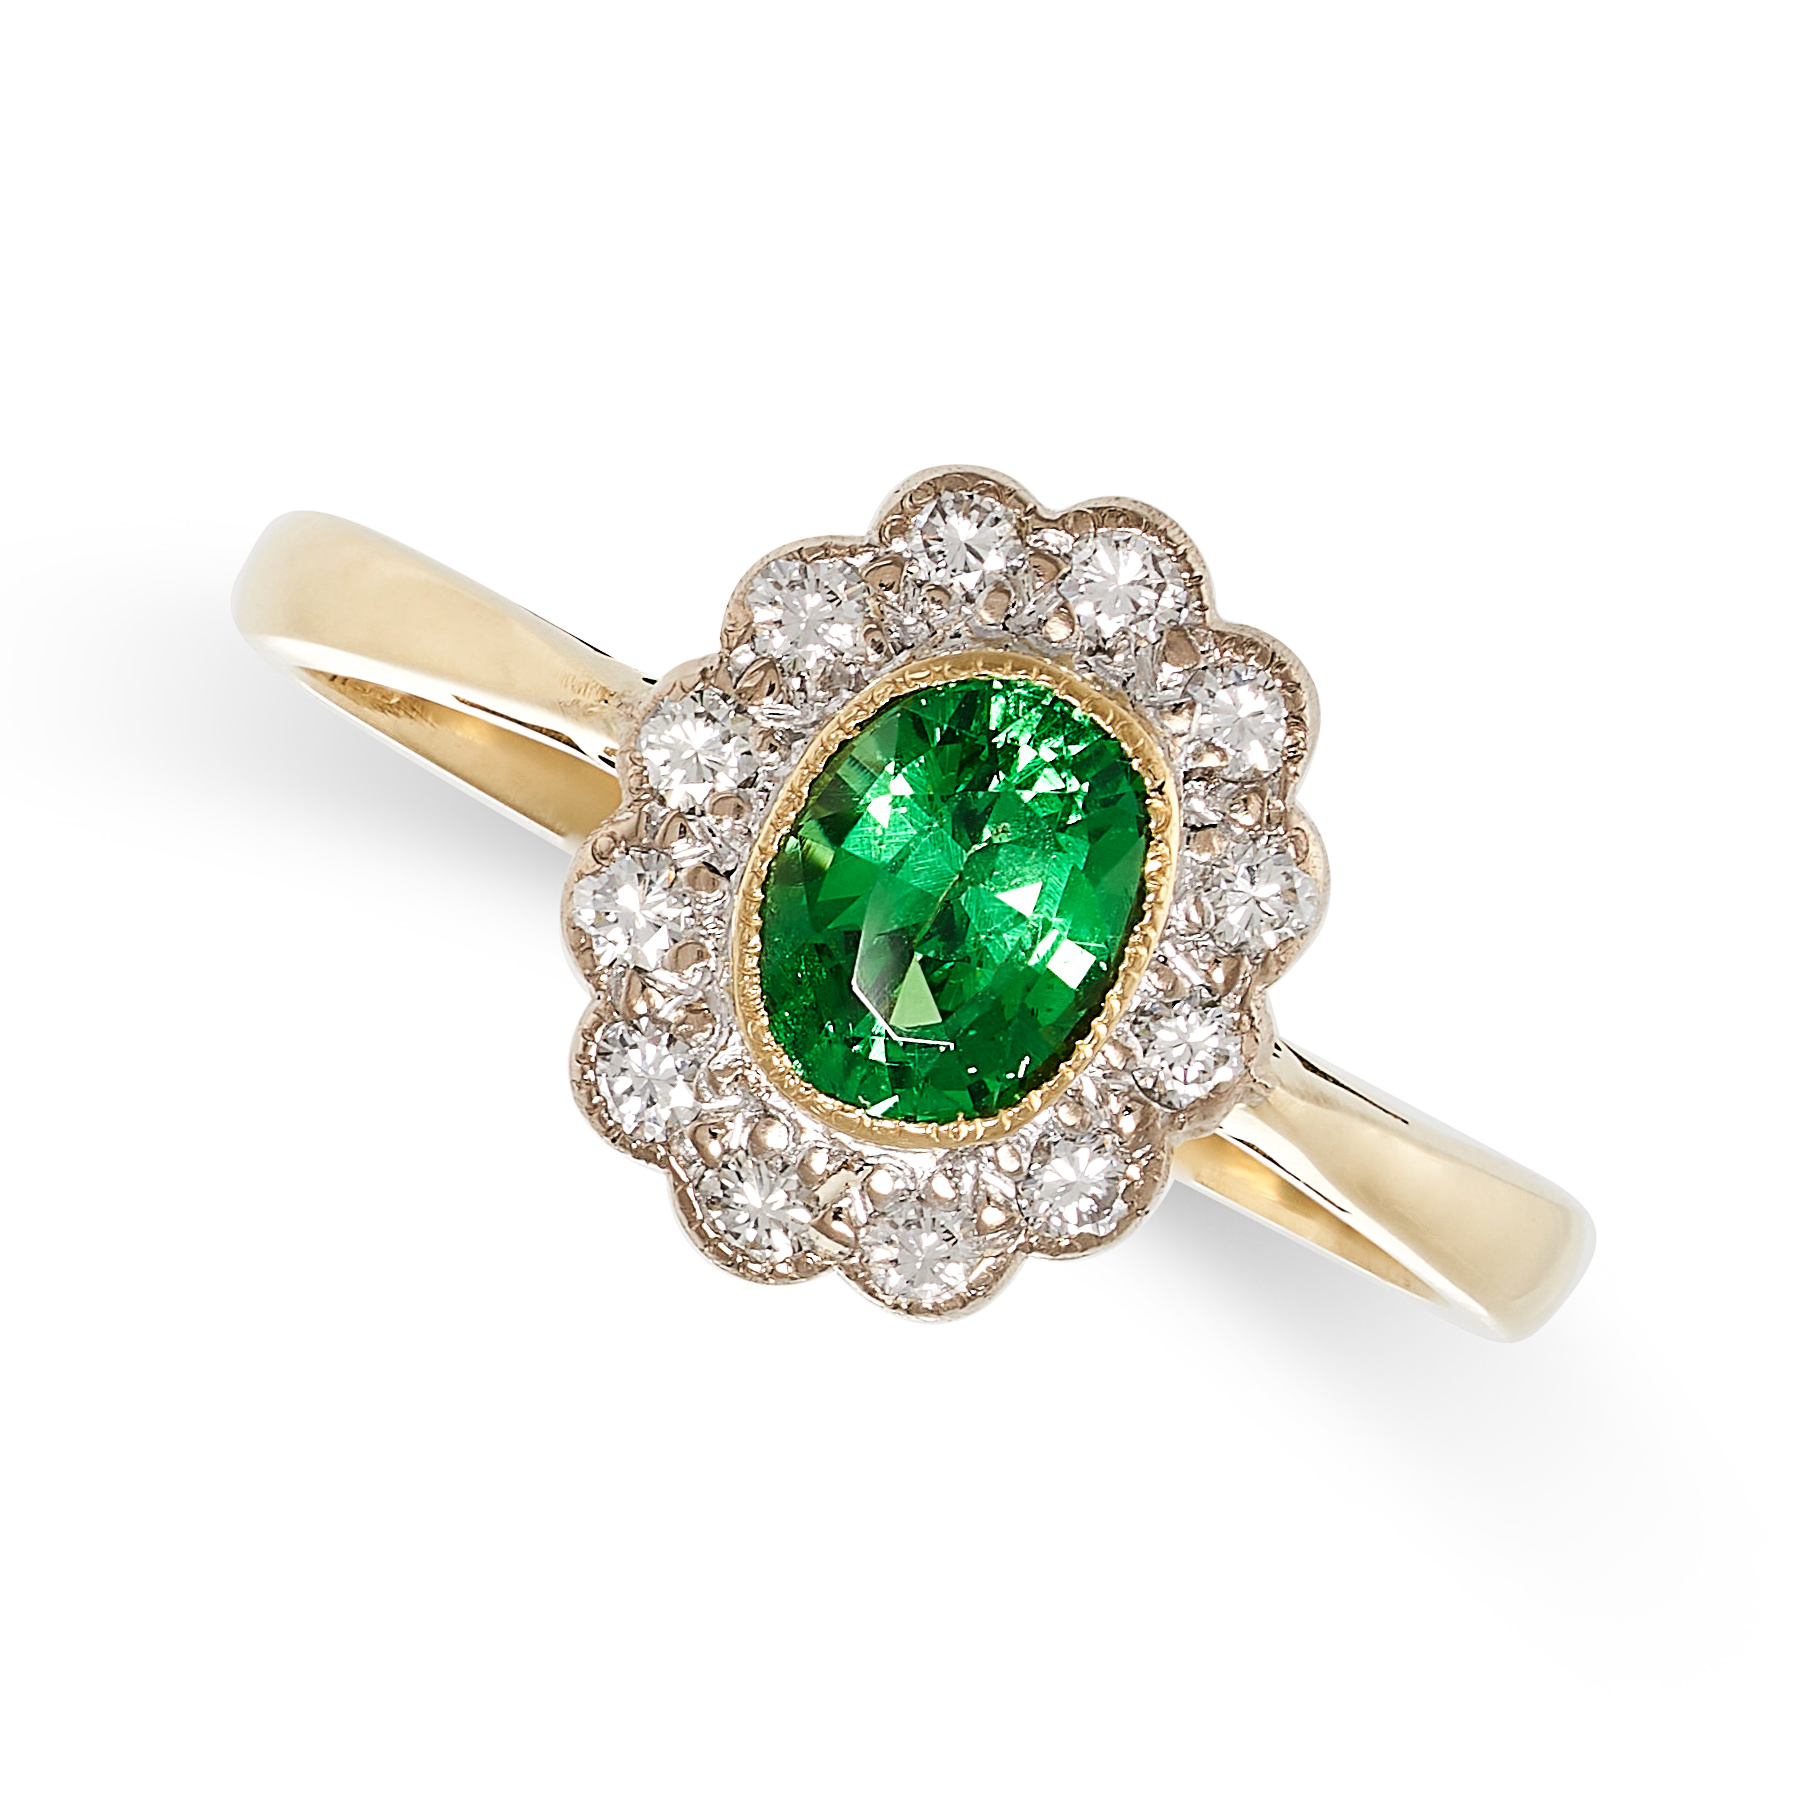 A DEMANTOID GARNET AND DIAMOND CLUSTER RING in 18ct yellow gold, set with a oval cut demantoid